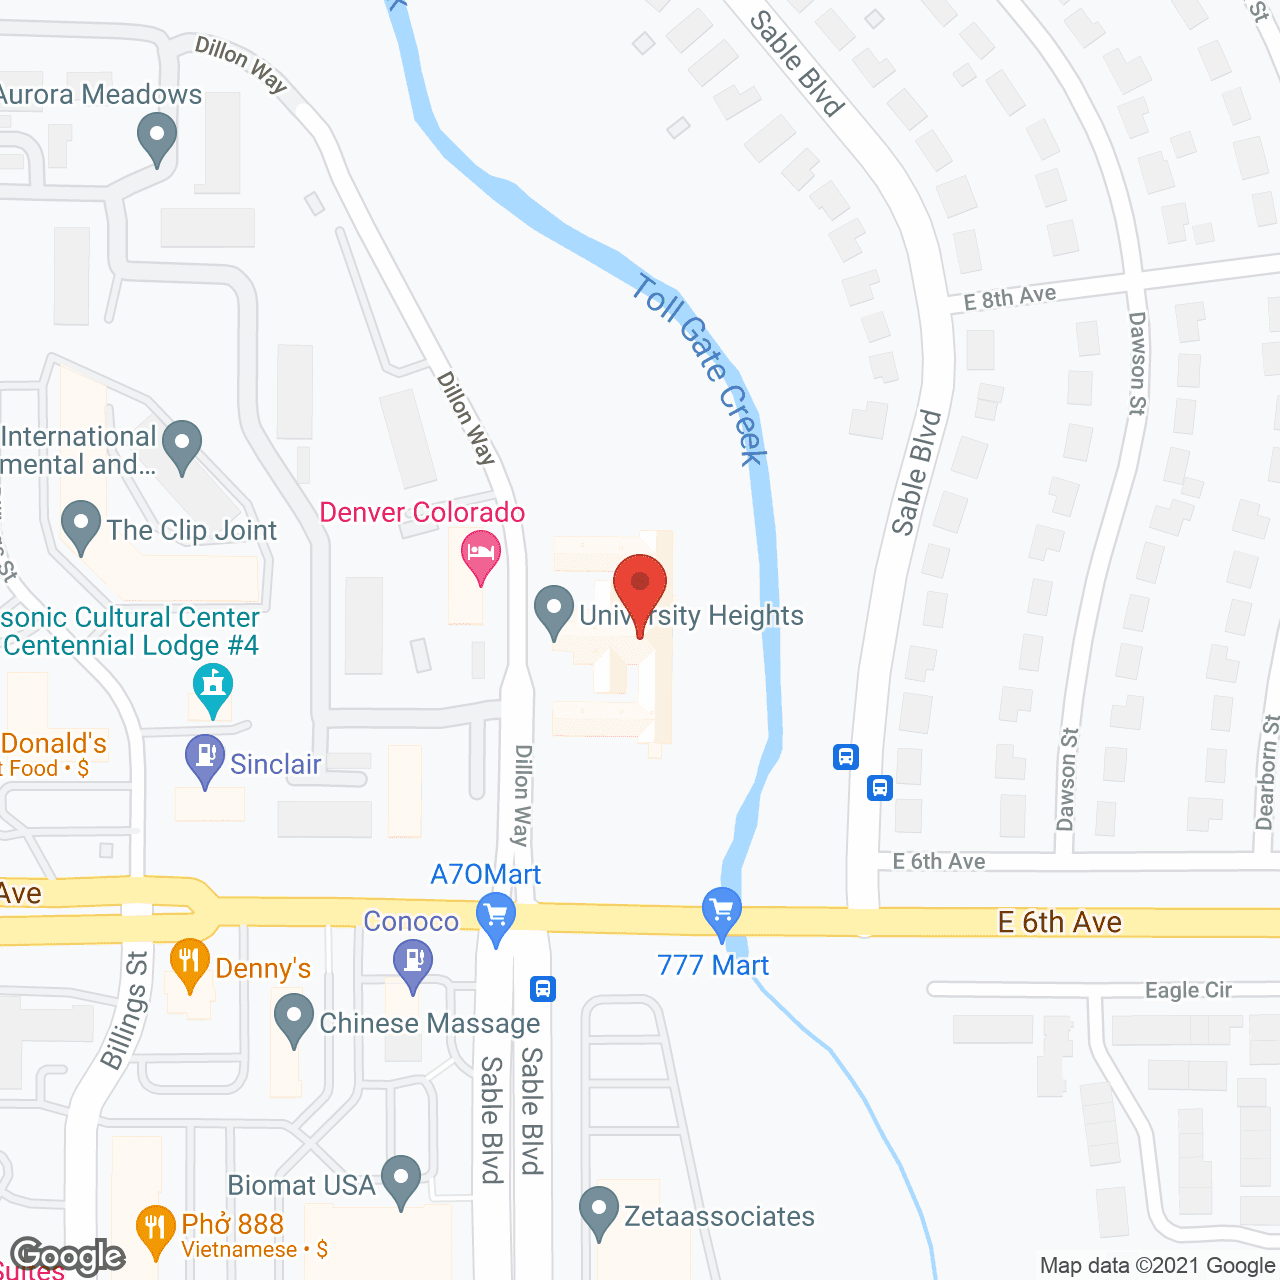 University Heights Rehab & Care in google map